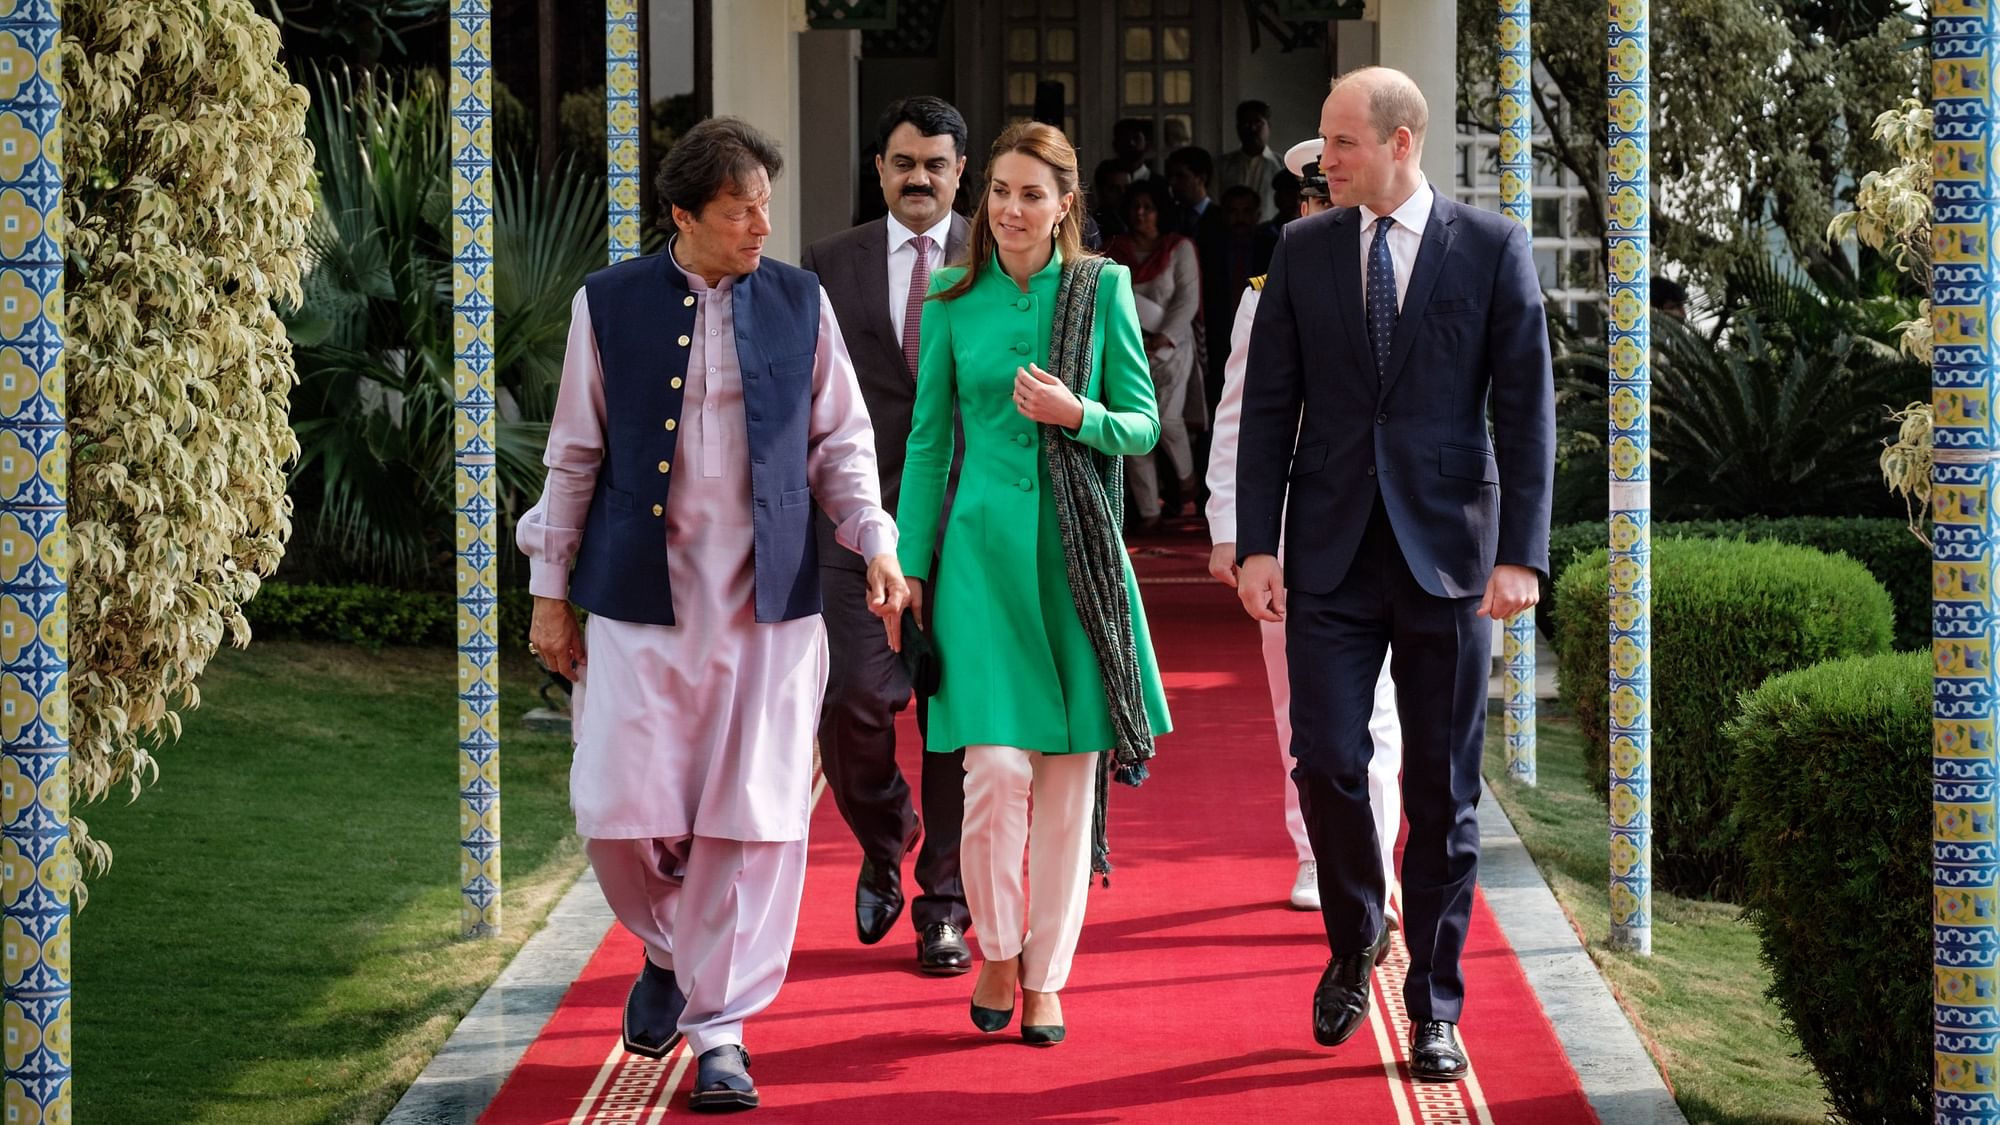 Pakistan’s foreign minister said that the couple will travel across the country and meet various people.